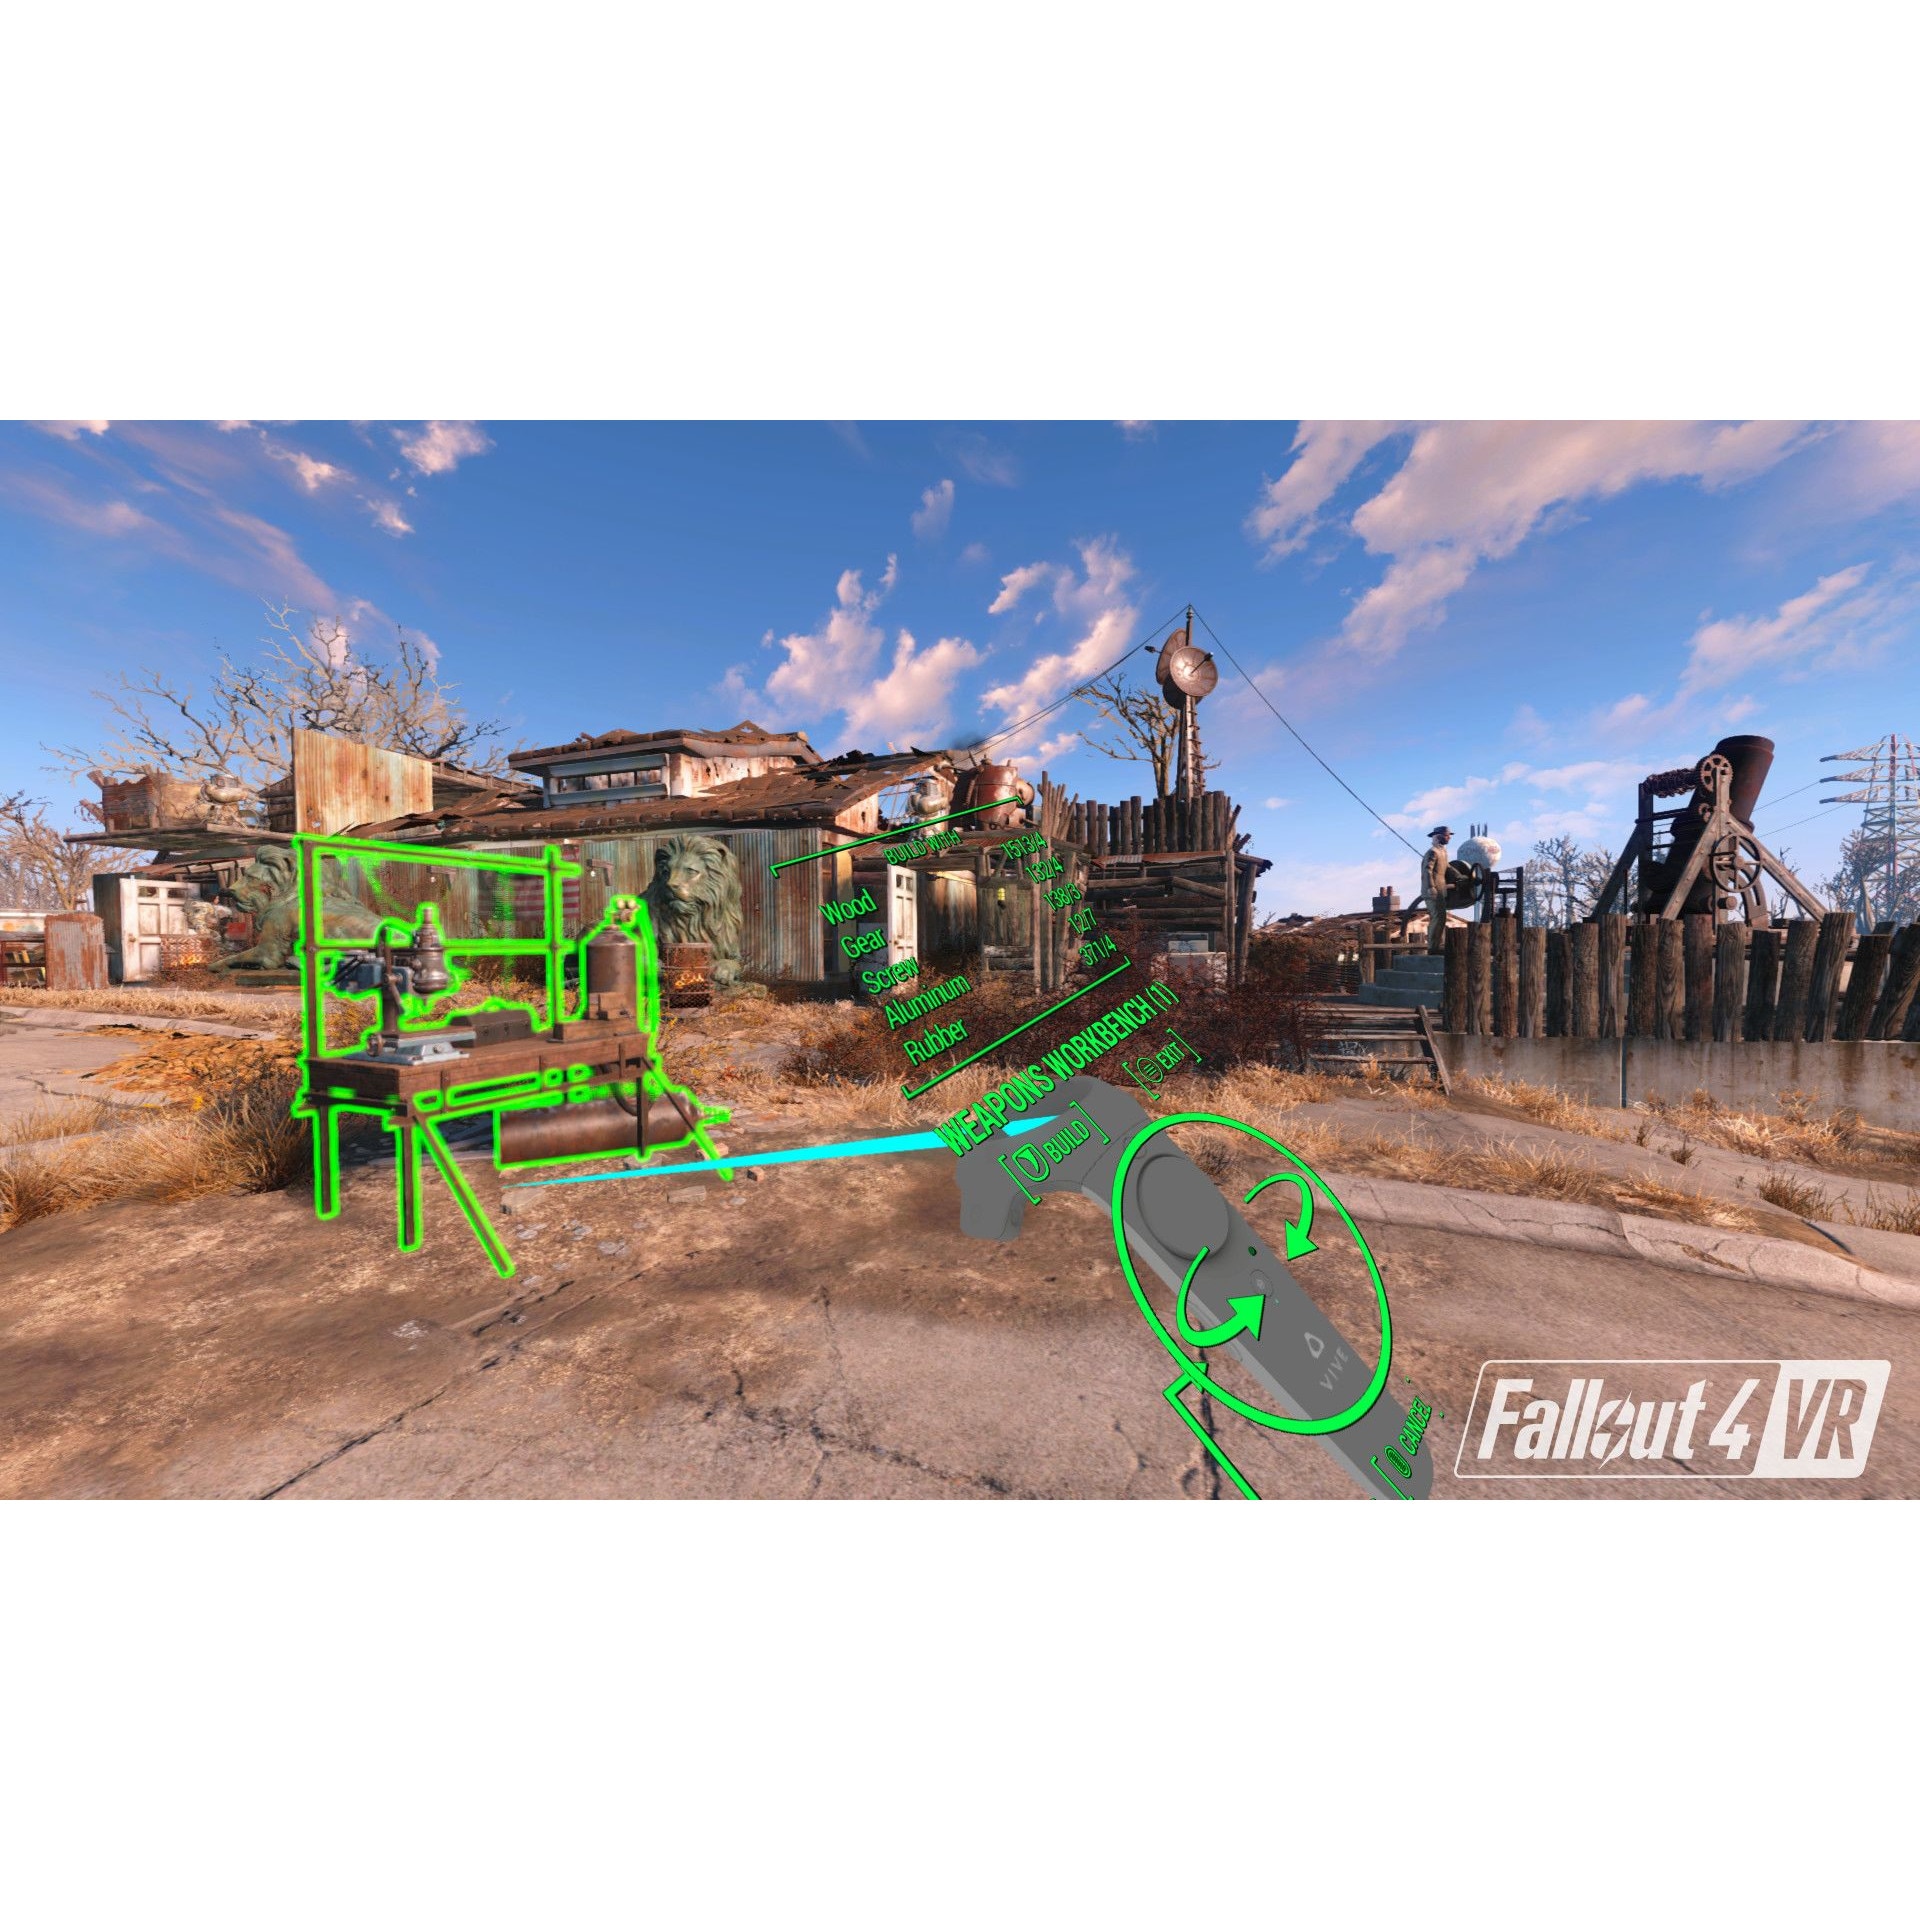 Fallout 4 vr download фото 27